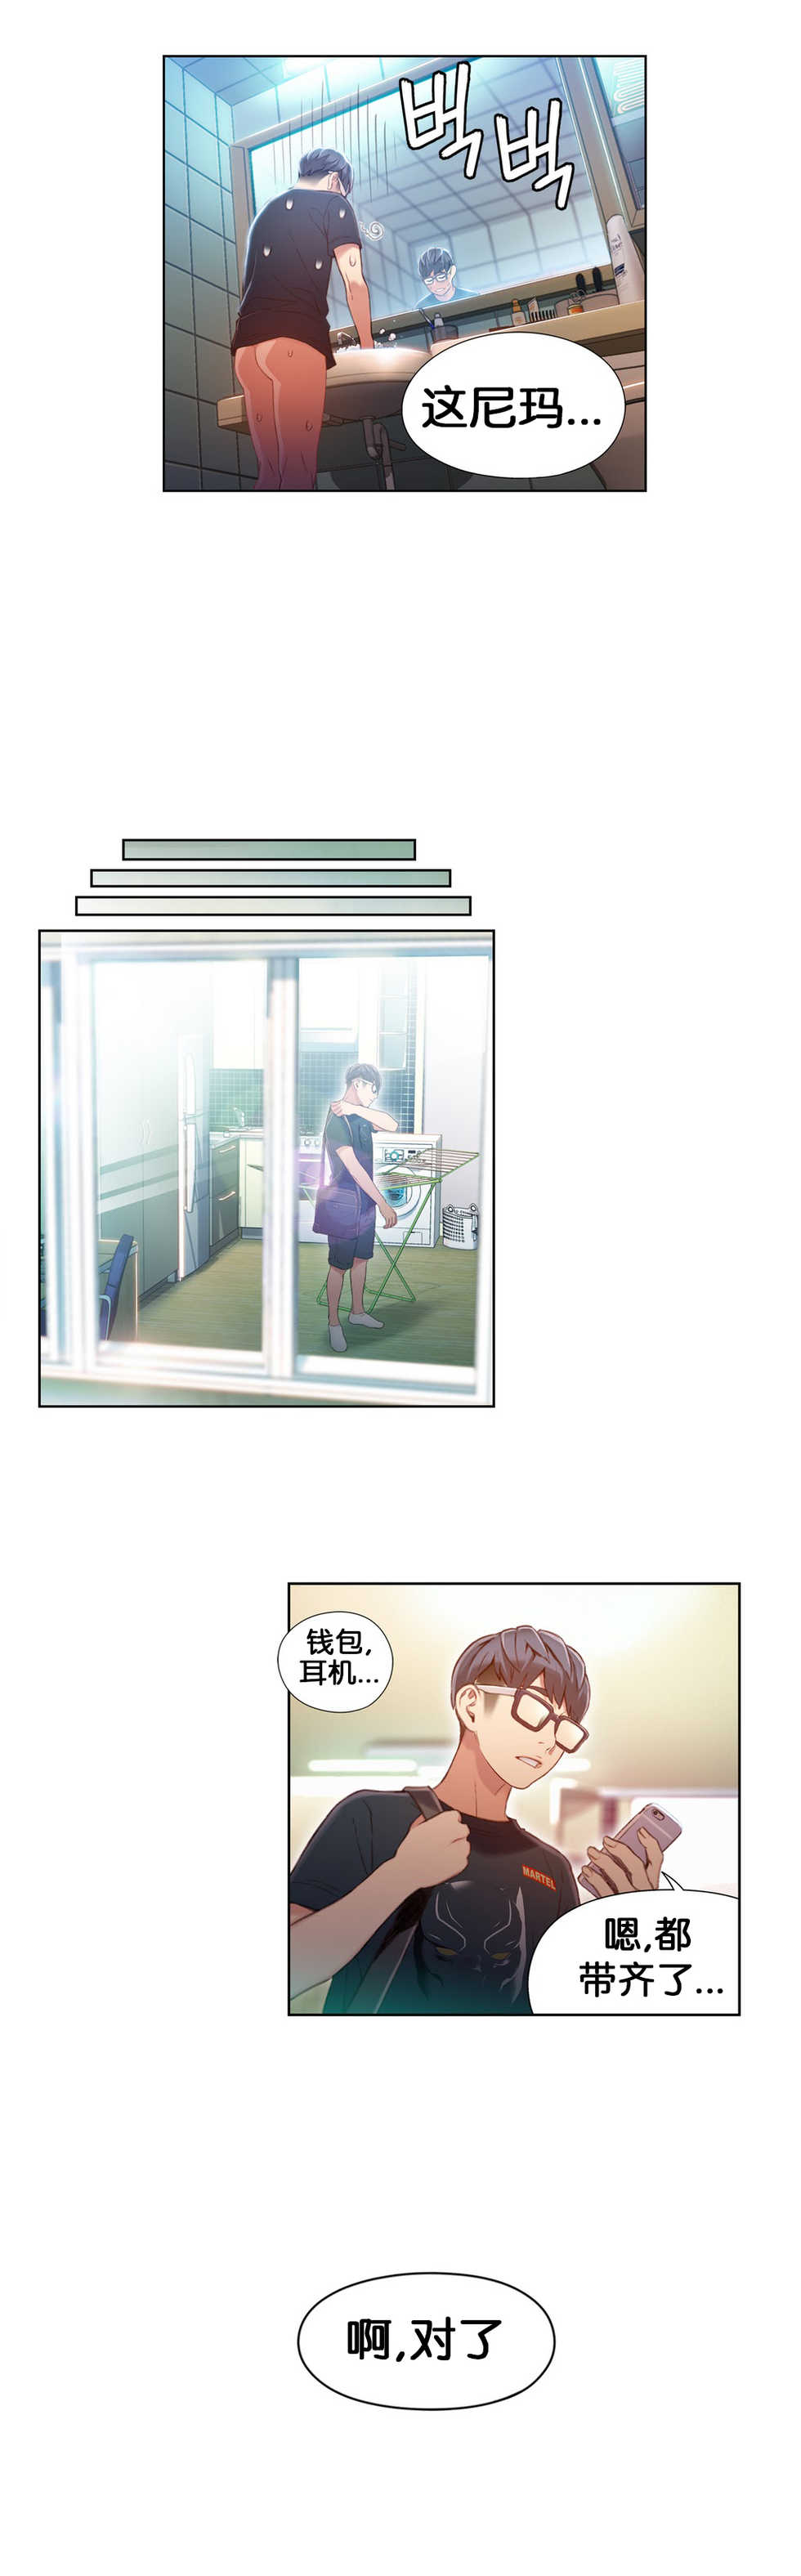 [BAK Hyeong Jun]Sweet Guy Ch.49-51(Chinese)(FITHRPG6) - Page 9